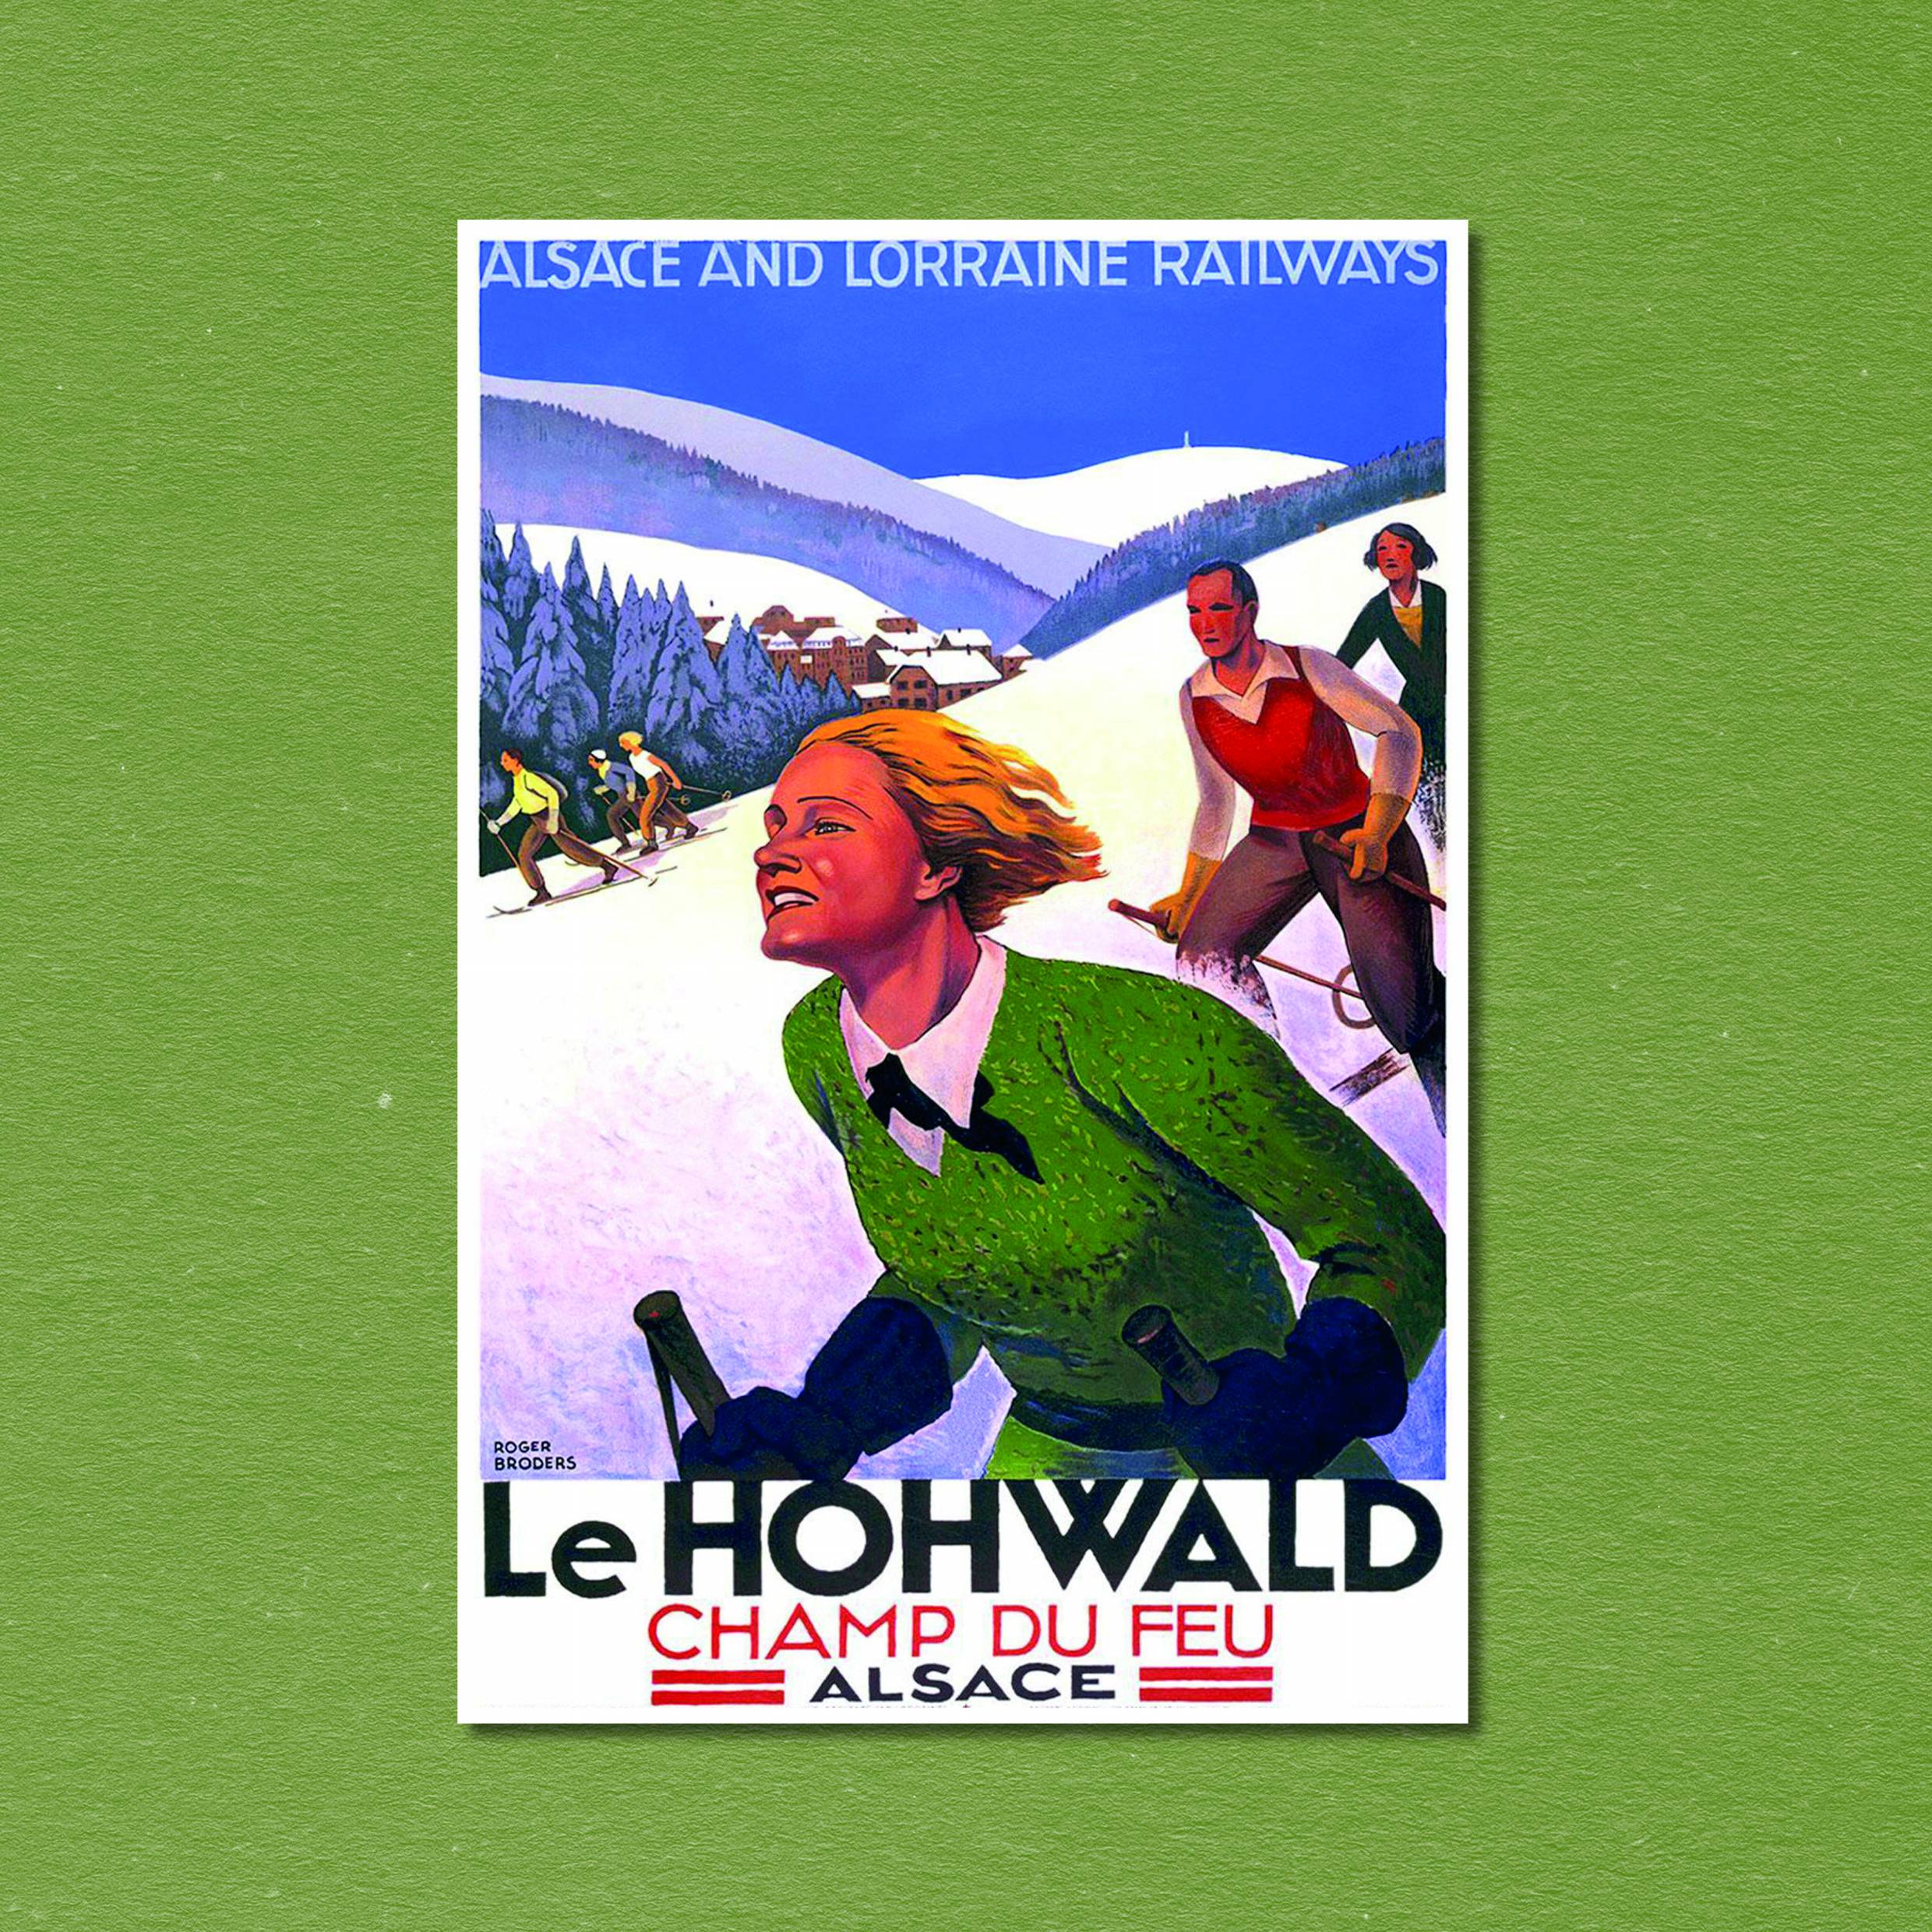 2023 Vintage Skiing Posters - Square Wall Calendar